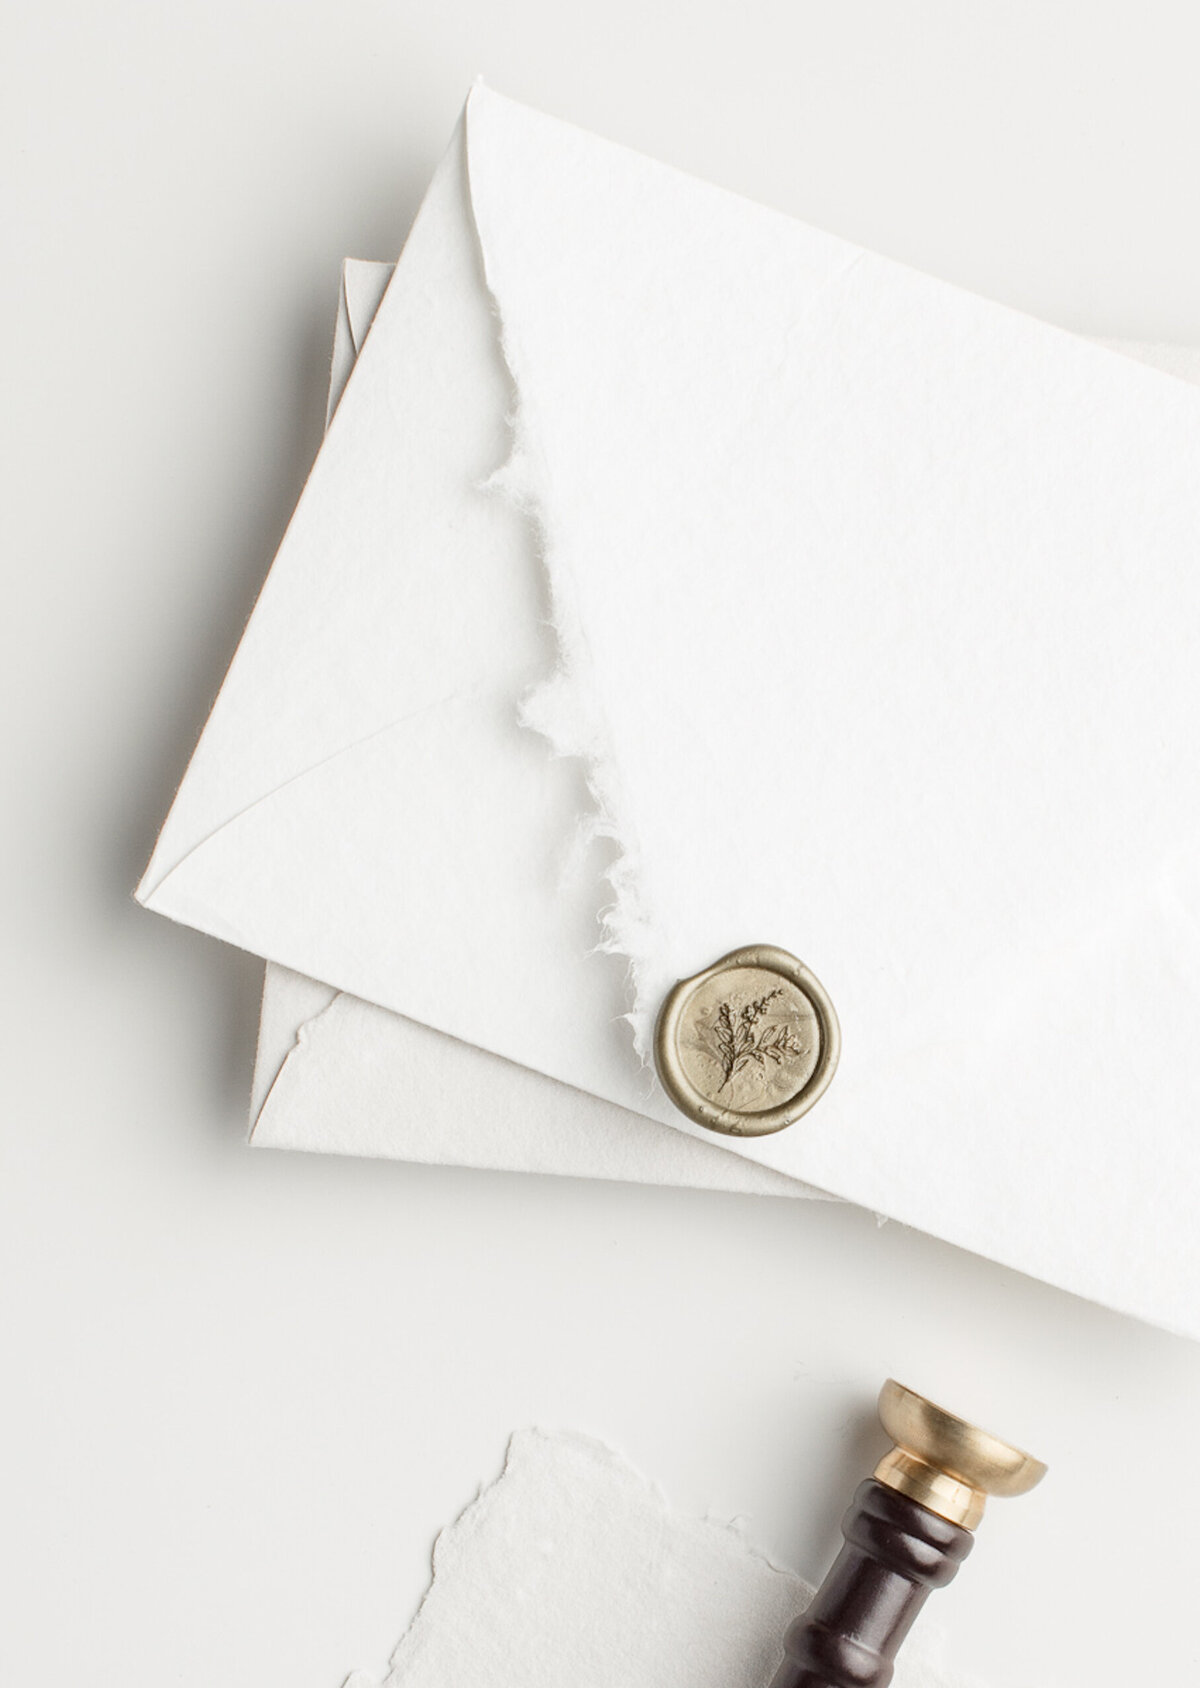 A stack of white handmade paper envelopes is shown, revealing the back flap  sealed with an antique gold wax seals. Beside the envelopes rests a wax stamp with a dark wood handle and brass stamp head.